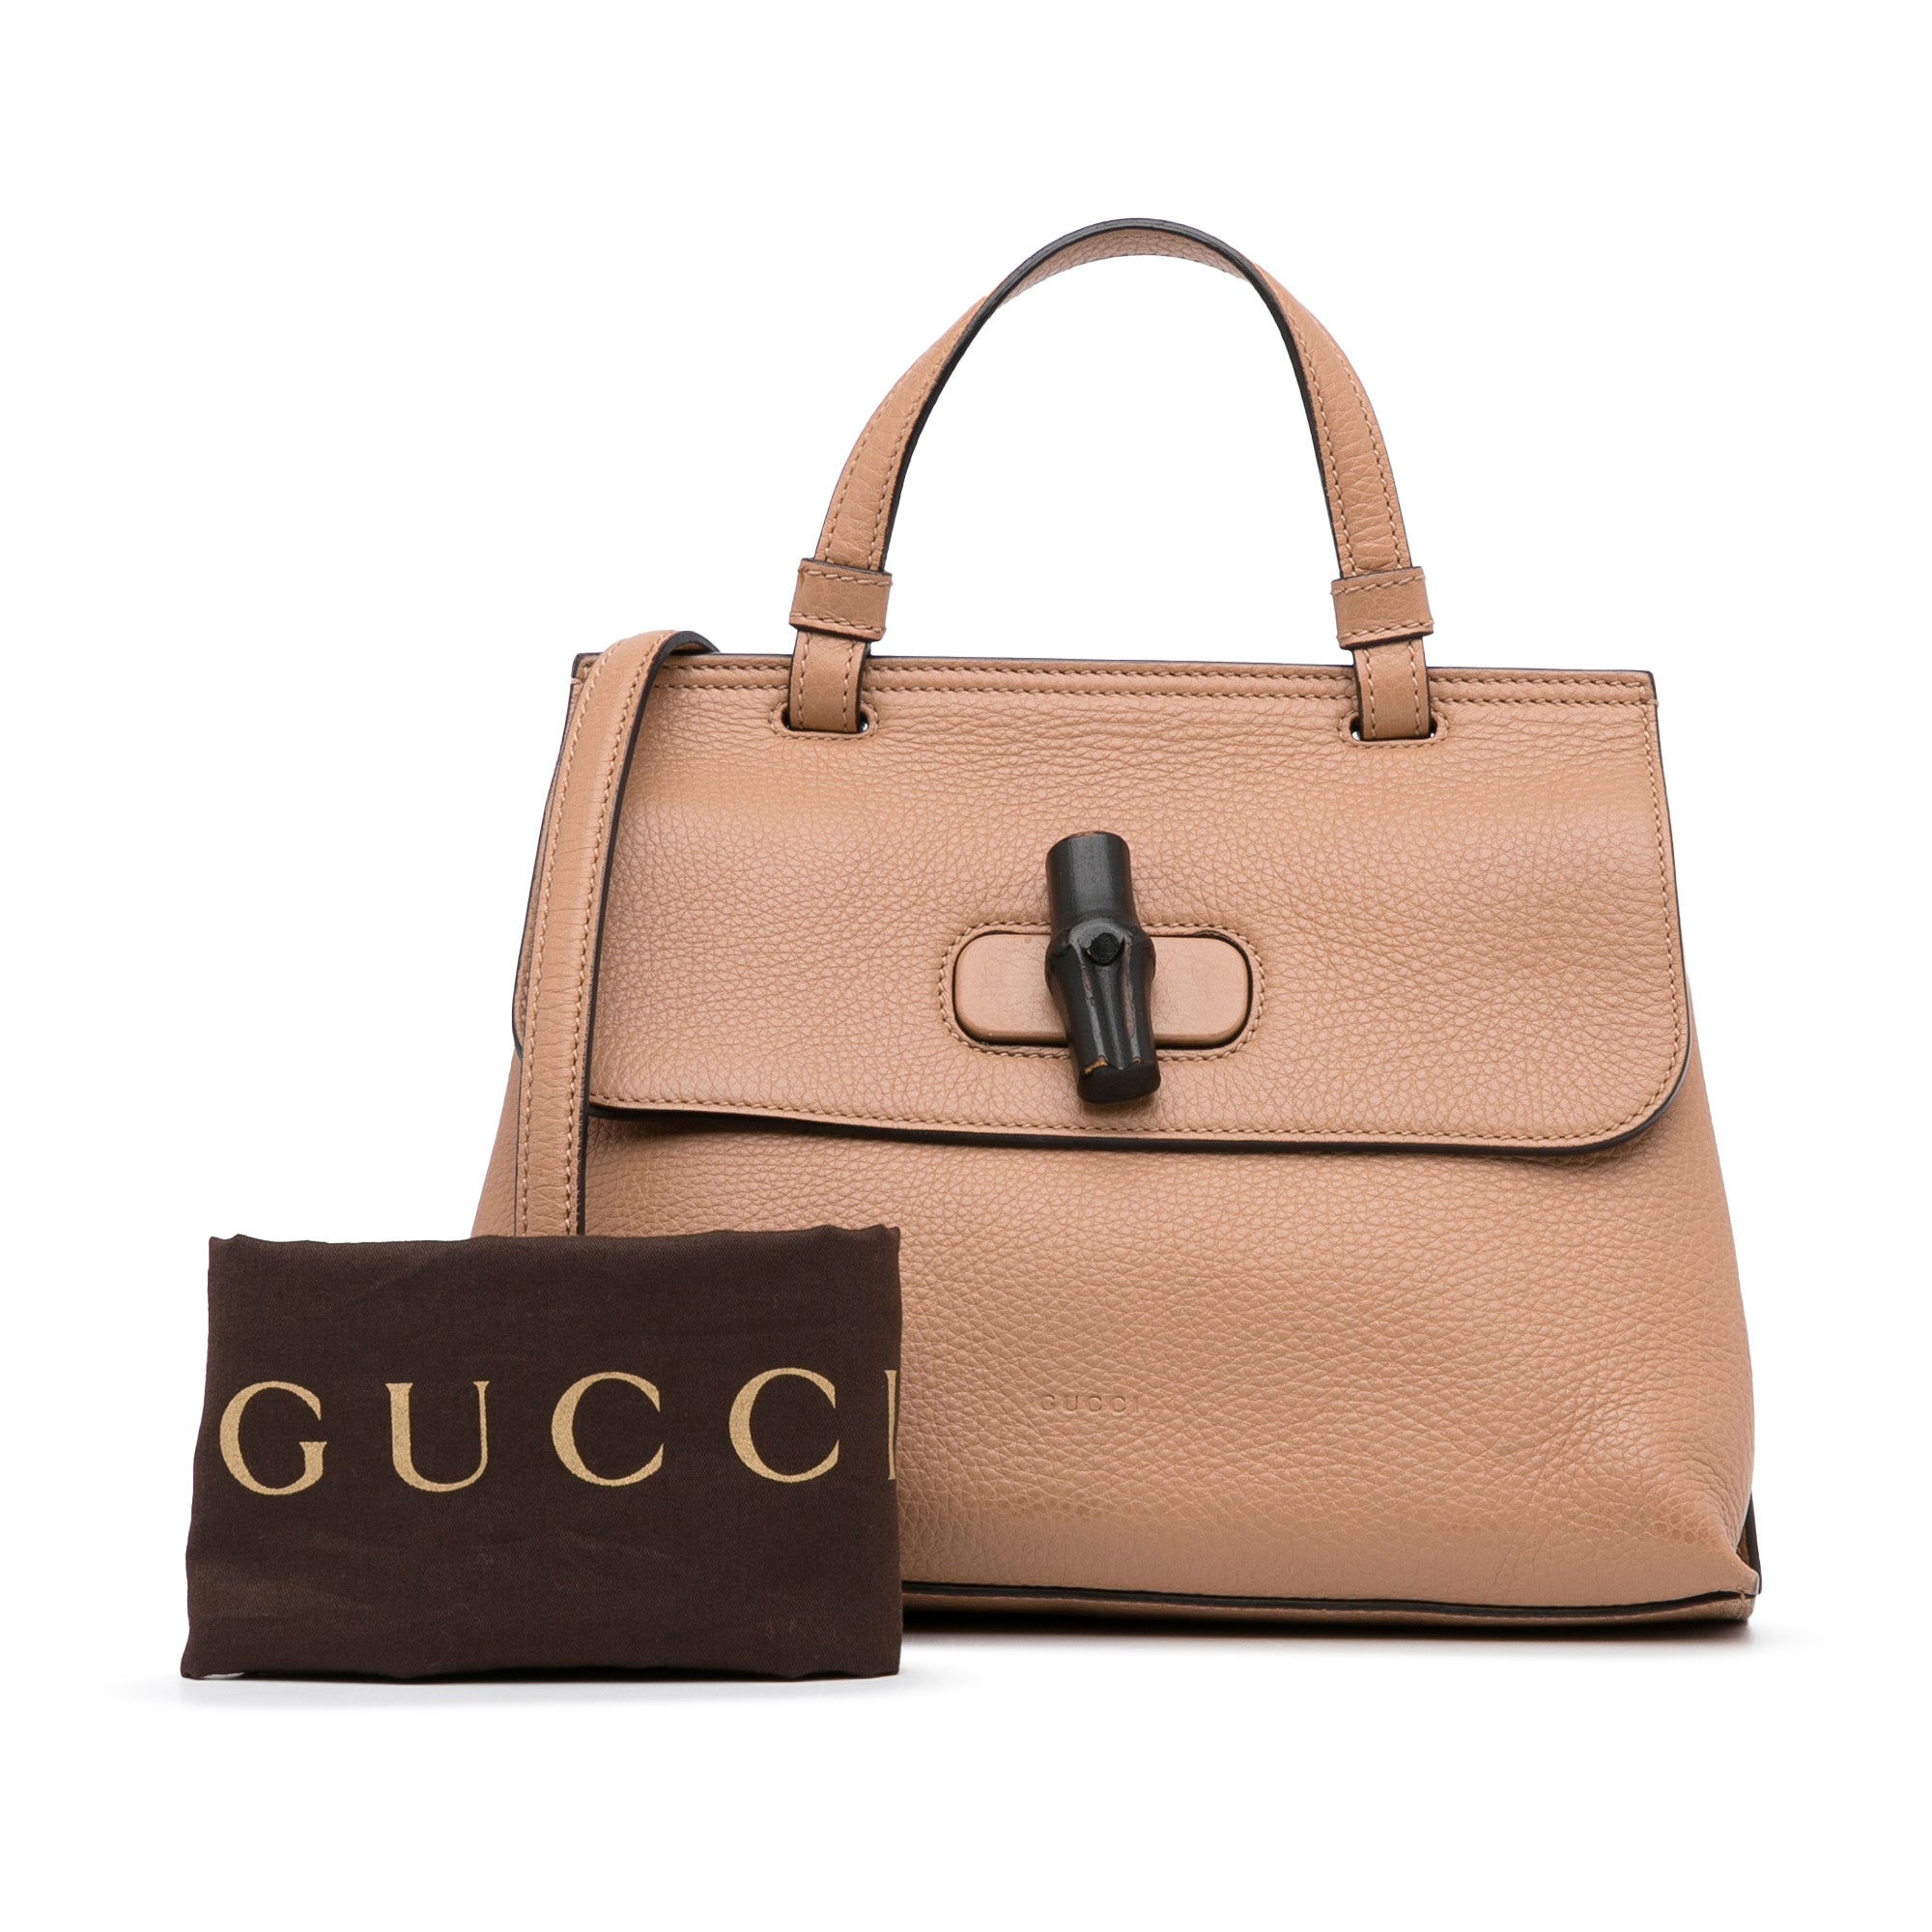 Gucci - Authenticated Bamboo Daily Top Handle Handbag - Leather Brown Plain for Women, Never Worn